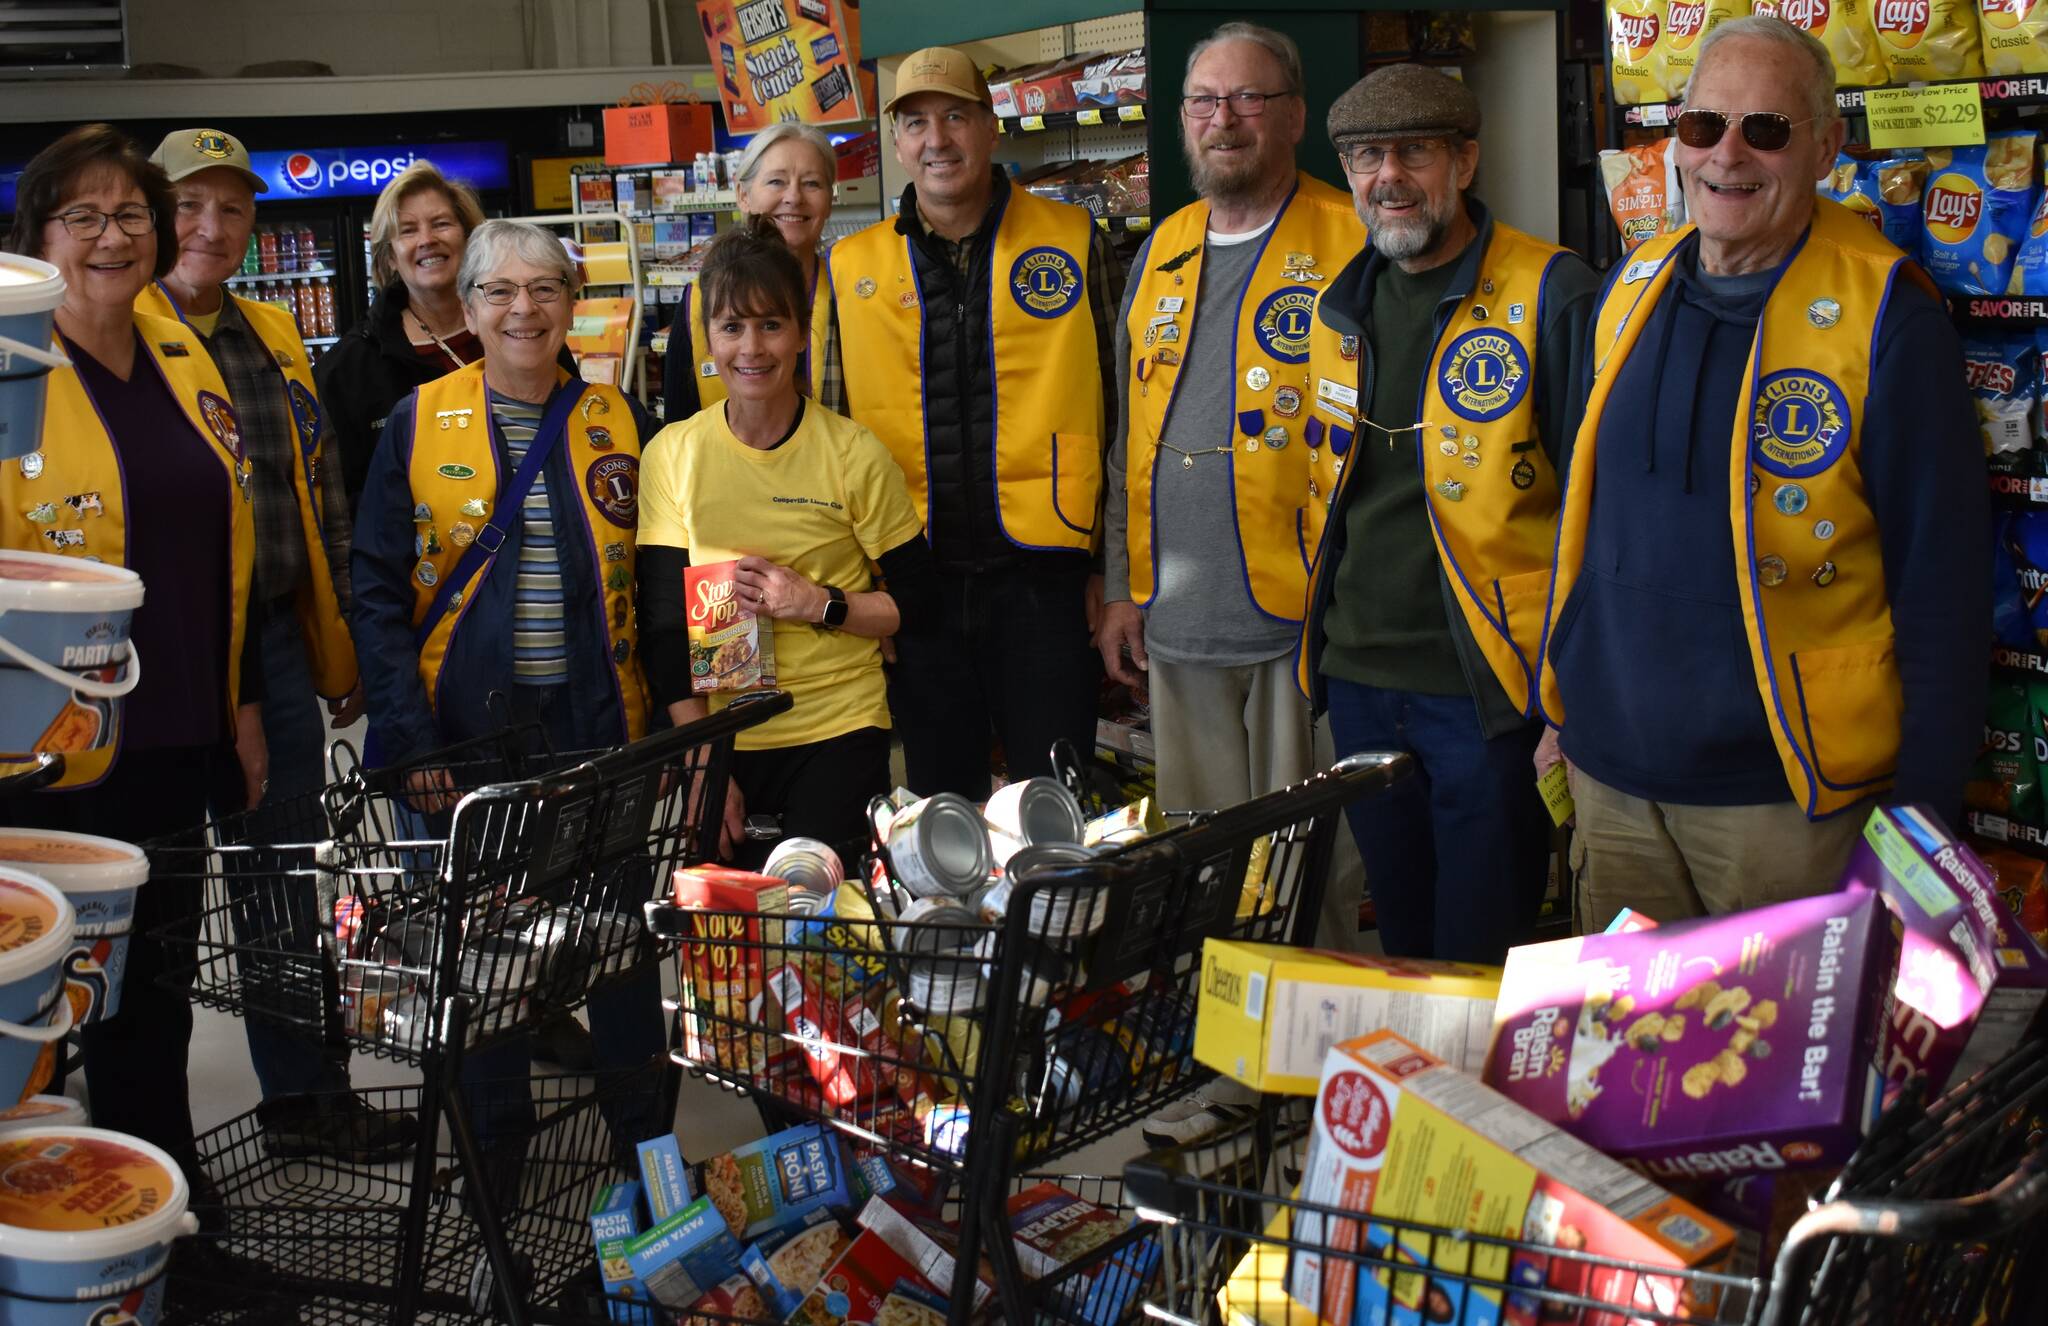 Photo provided
From left, Coupeville mayor Molly Hughes, Gary Youngs, Becky Johnson, Sue Hartin, Sandy Johnson, Jennifer Carroll, Mike Carroll, Dennis Egan, Gary Parker and Hugh Hedges stand with carts of groceries that the Gifts from the Heart Food Bank won in an annual shopping spree raffle.